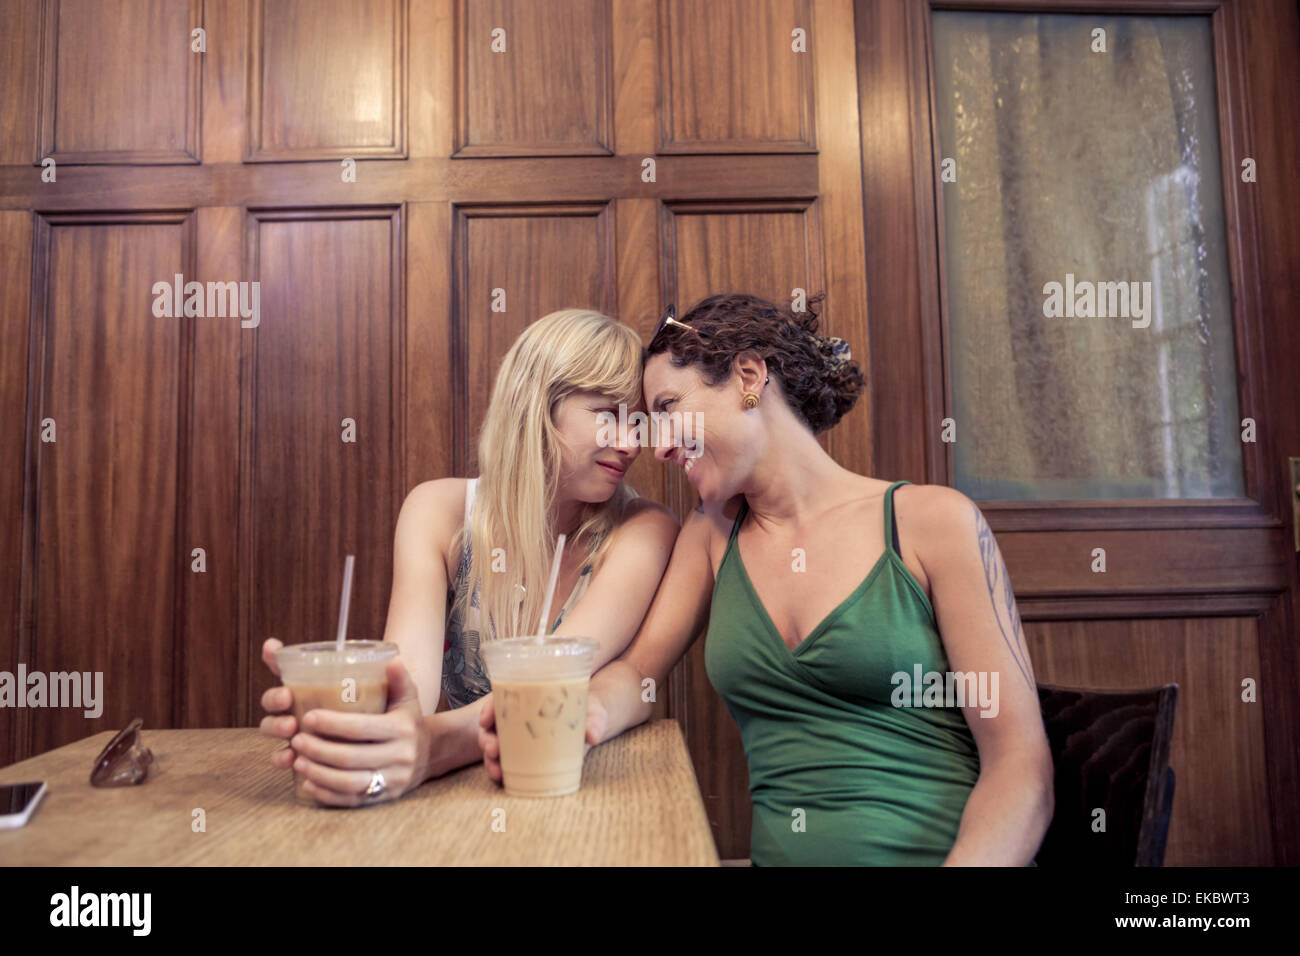 Two women face to face sharing intimacy in cafe Stock Photo